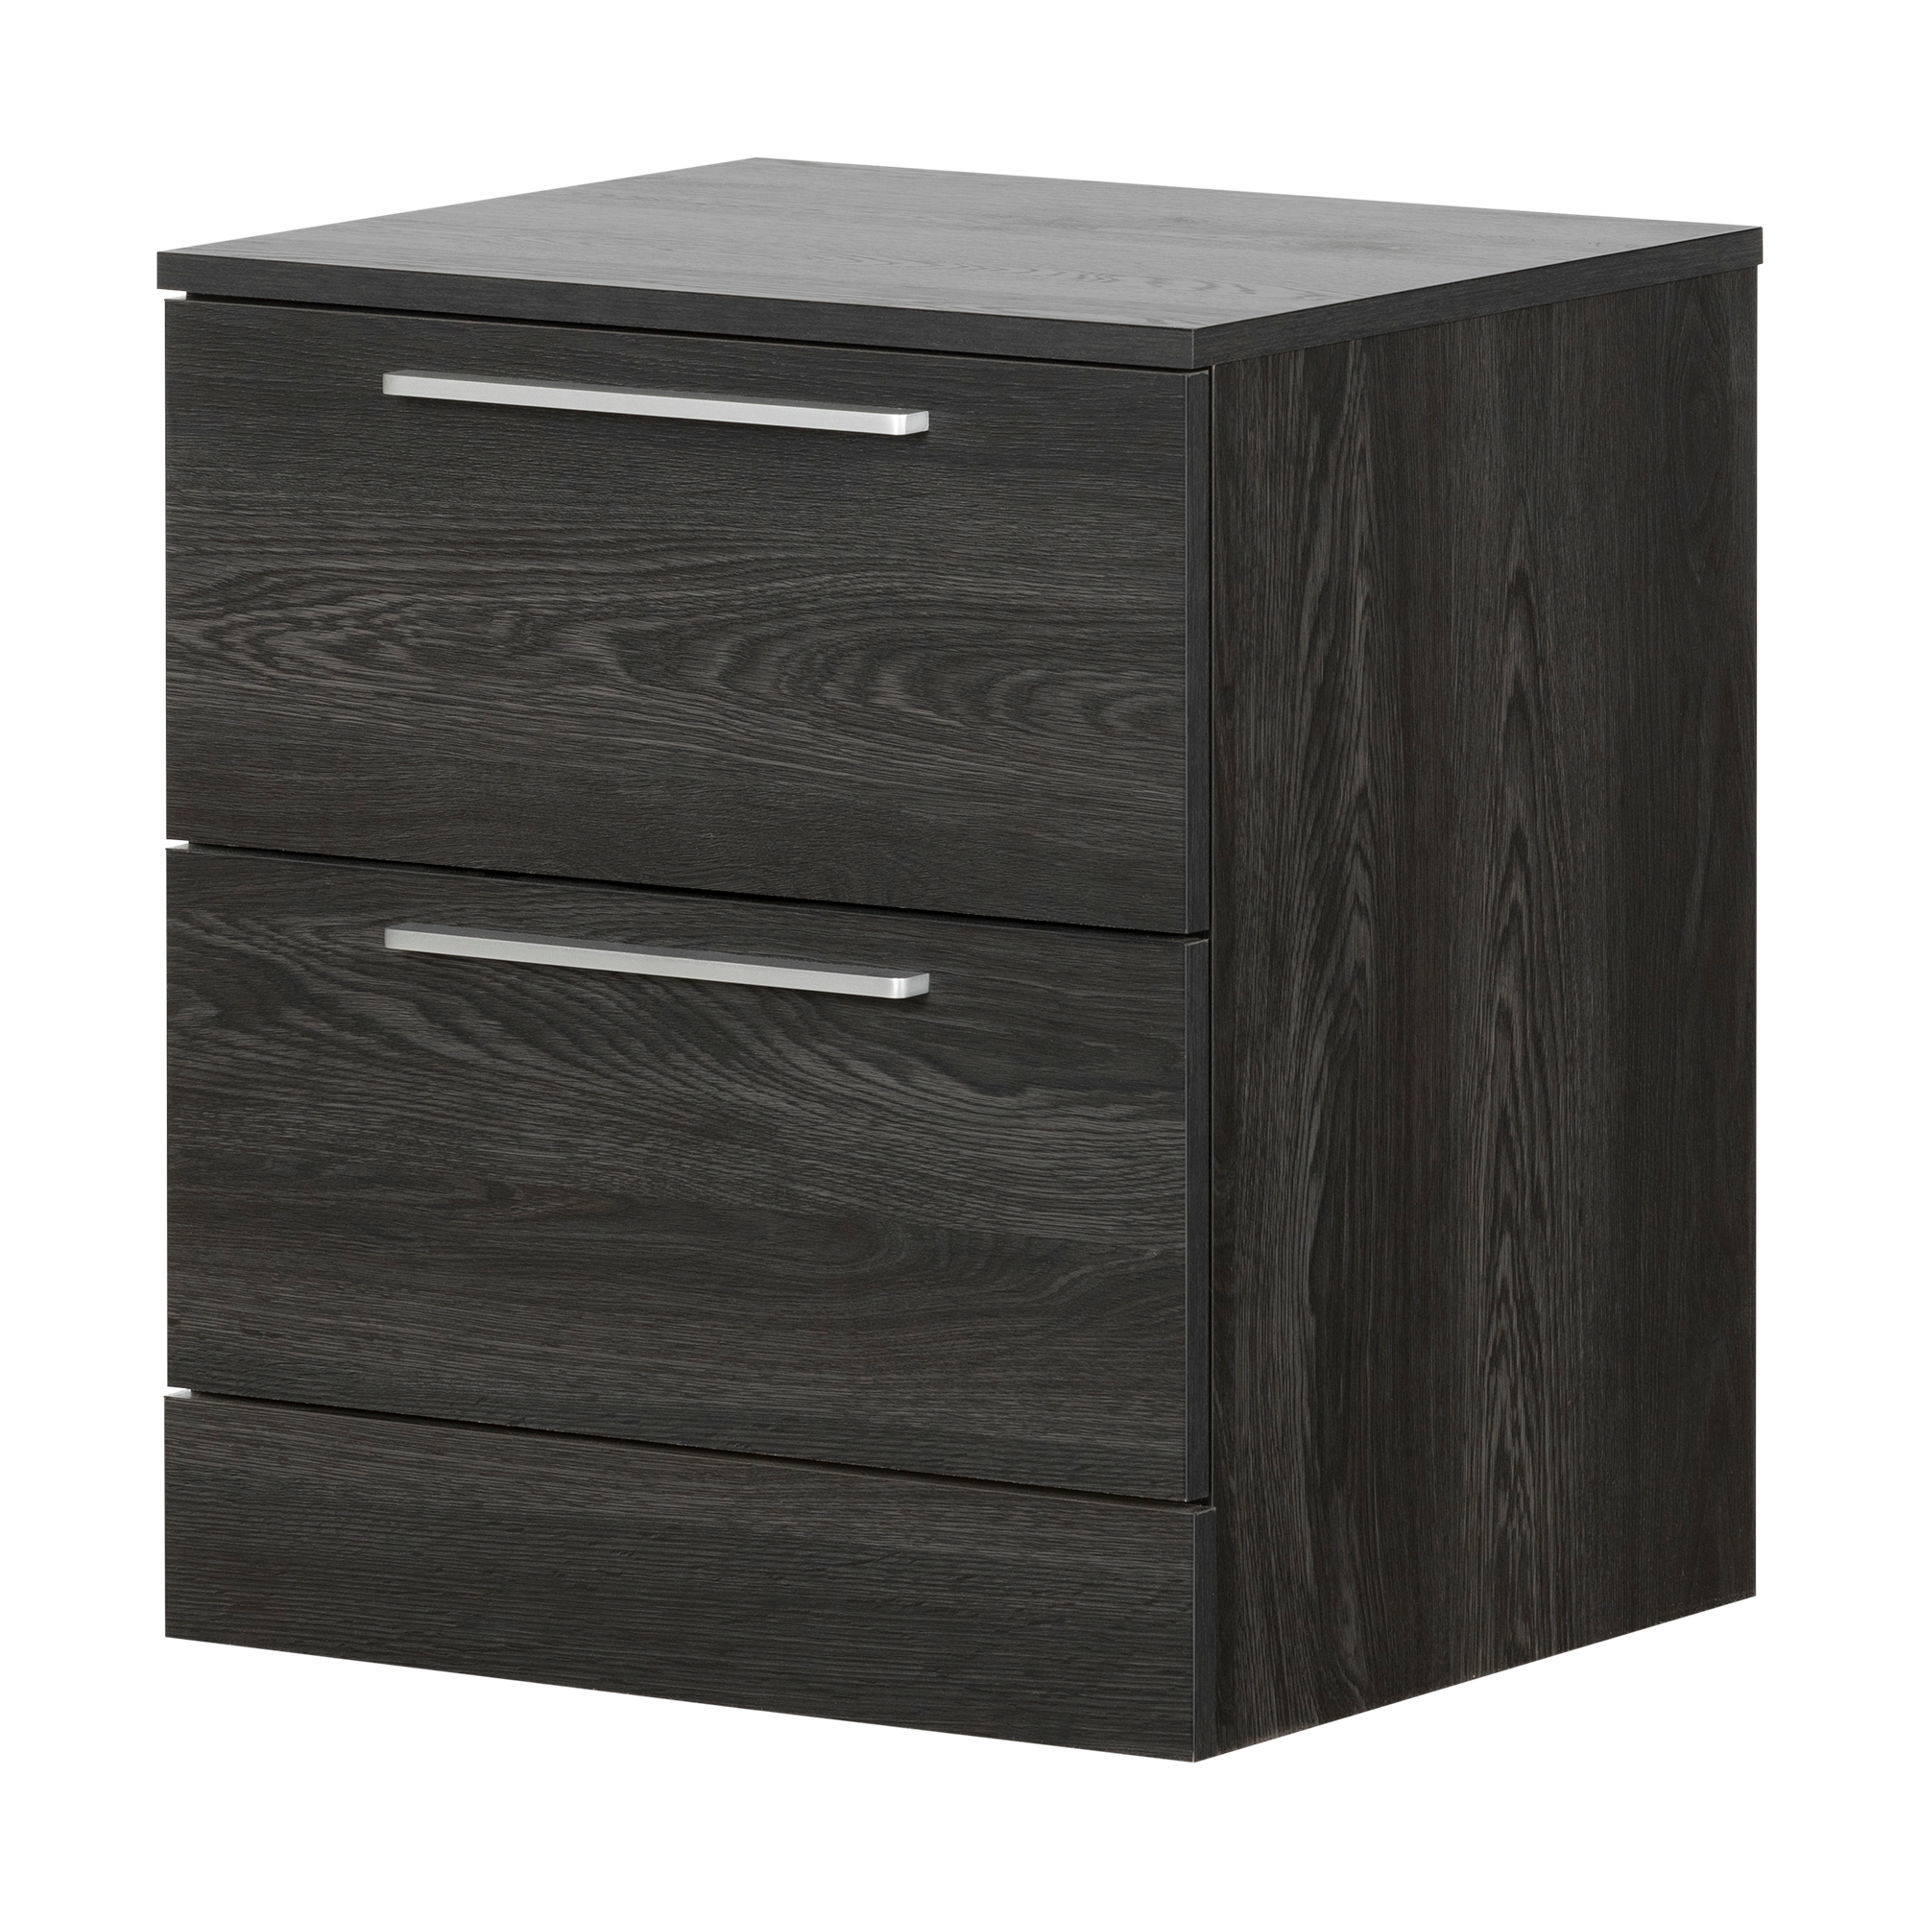 11315 - Fusion - 1-Drawer Nightstand | AFW.com